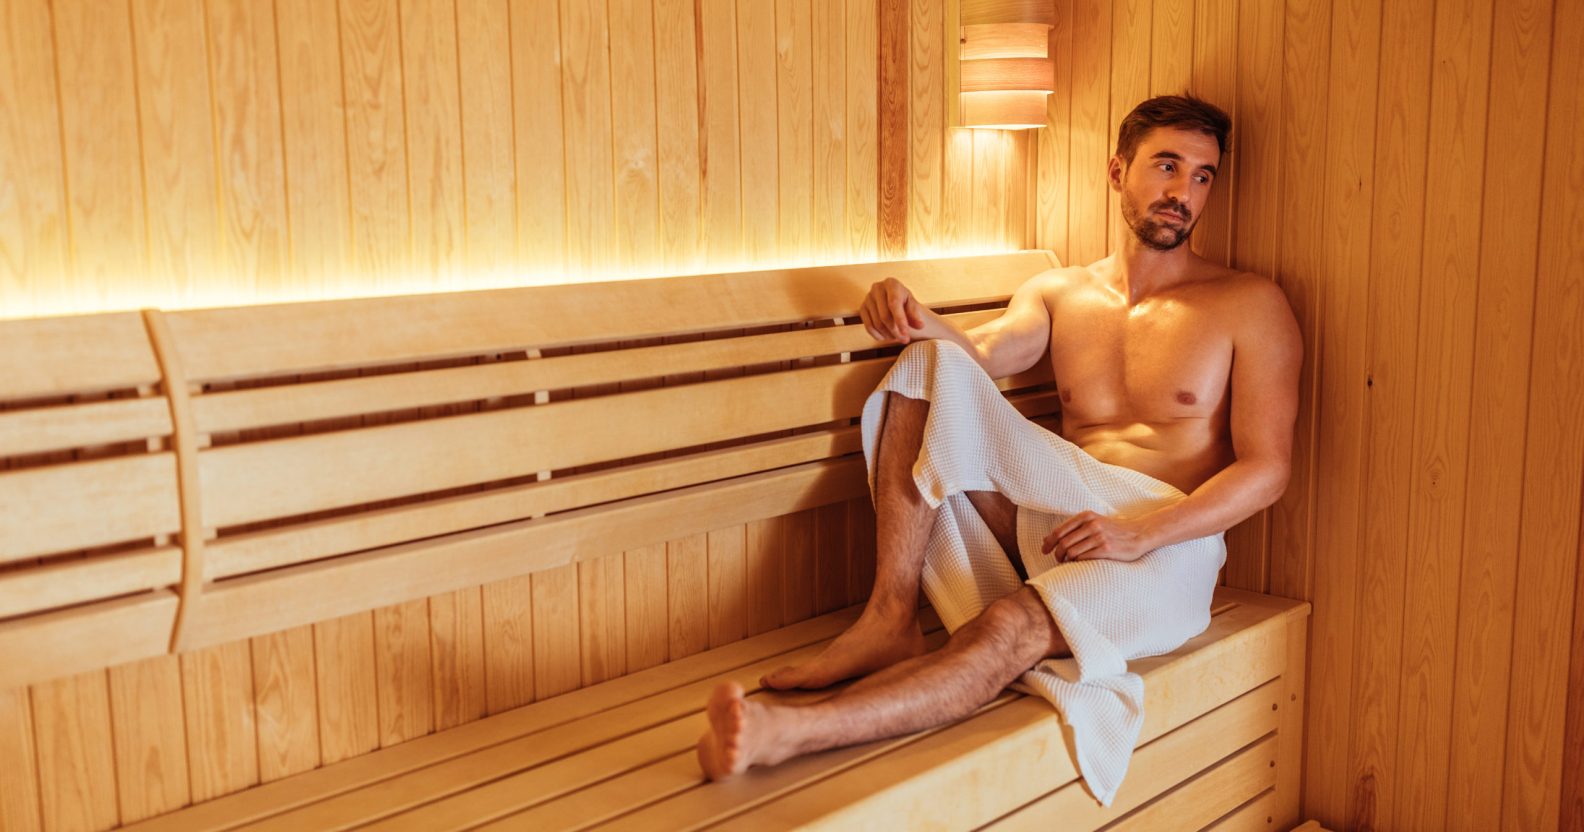 Gay saunas to reopen across the UK as soon as this week